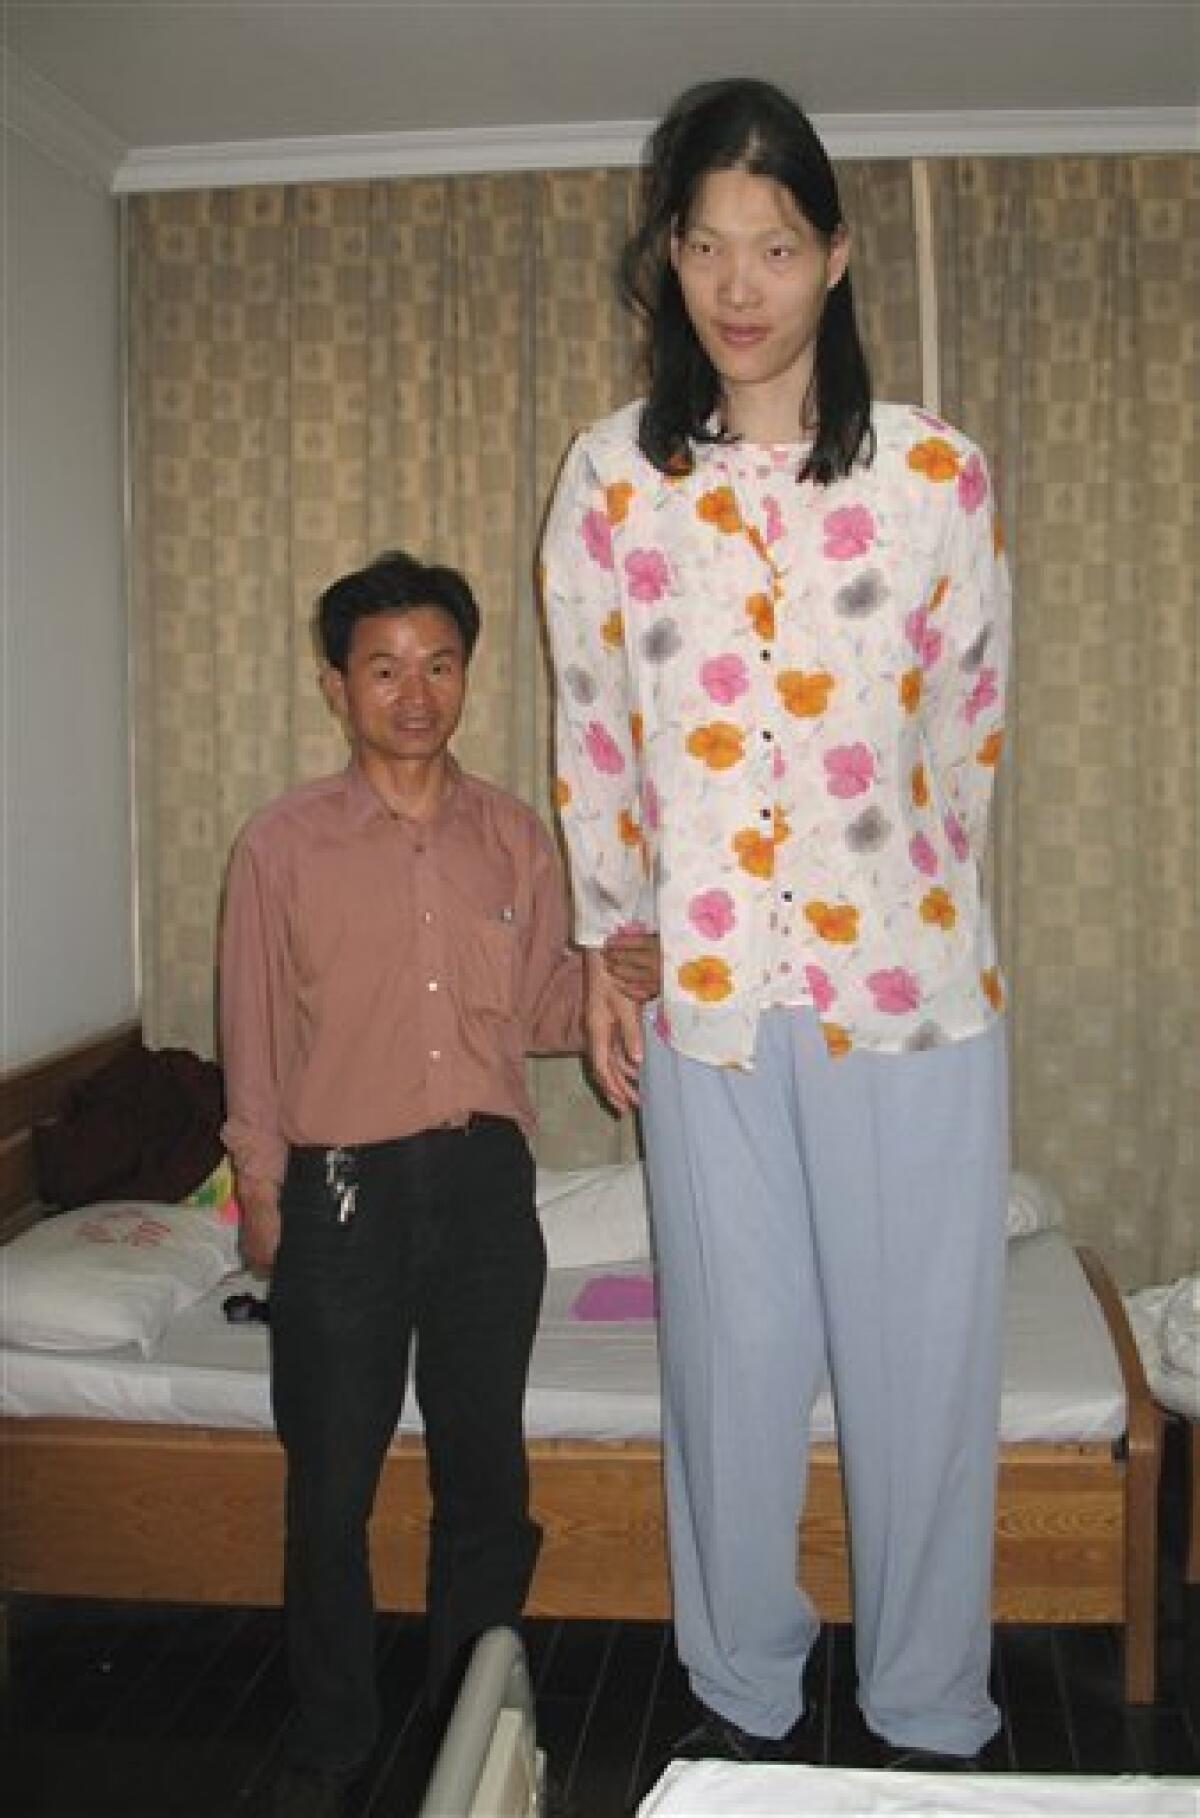 World's tallest woman dies in China at age 39 - The San Diego Union-Tribune